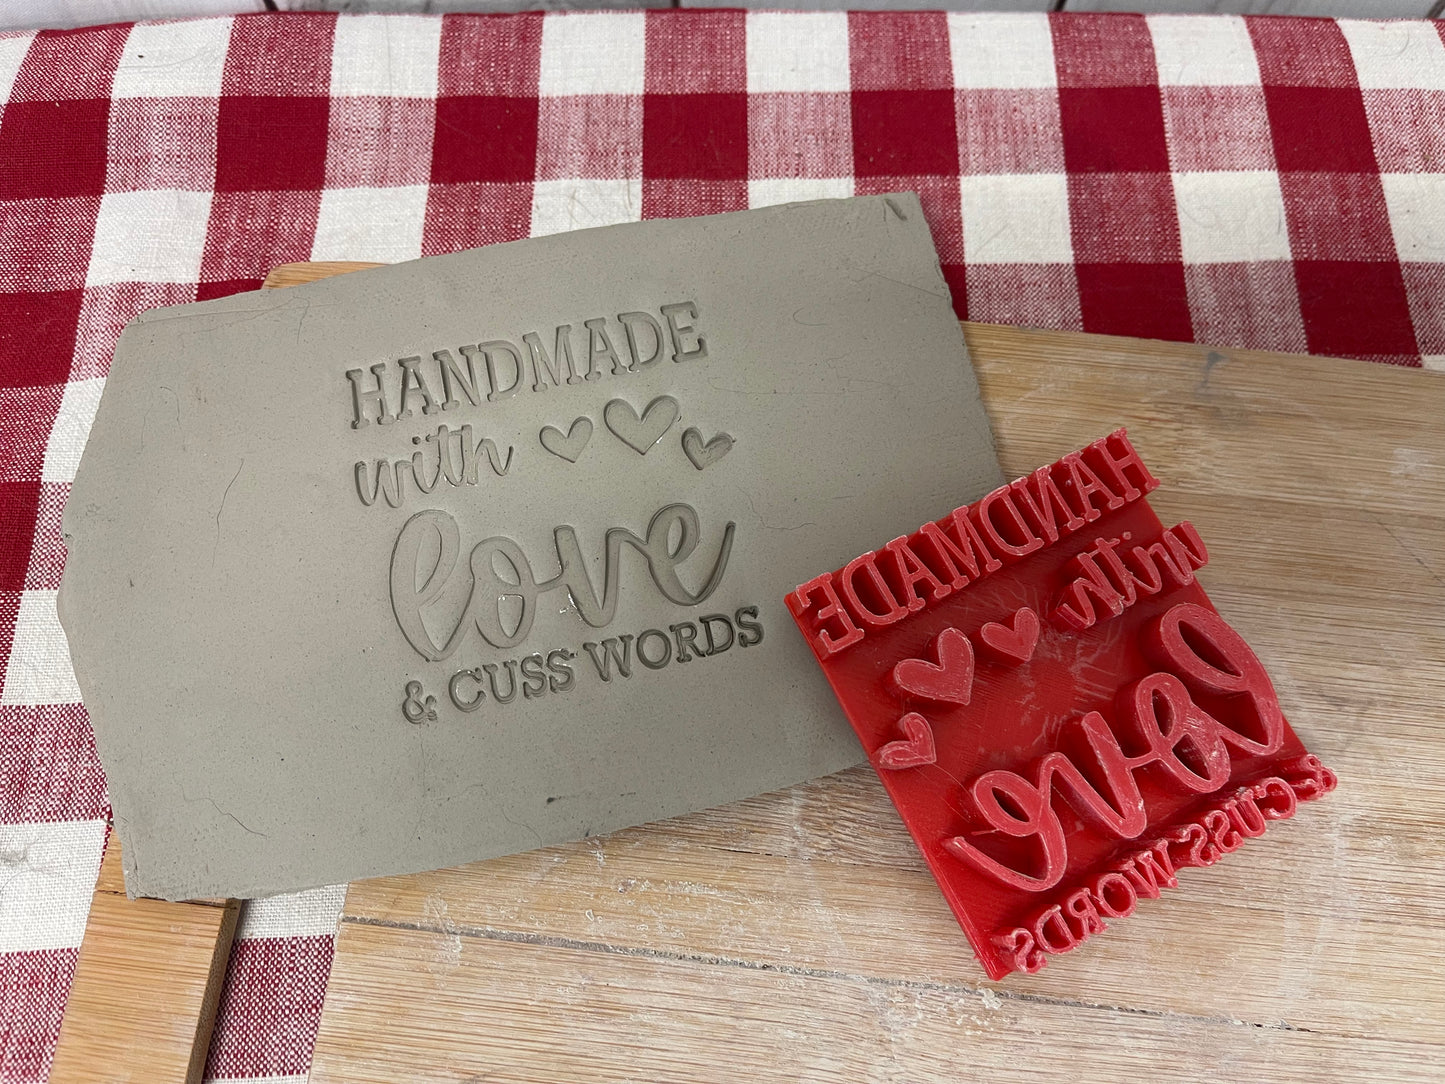 "Handmade with Love & Cuss Words" word stamp -  plastic 3D Printed, Multiple Sizes Available